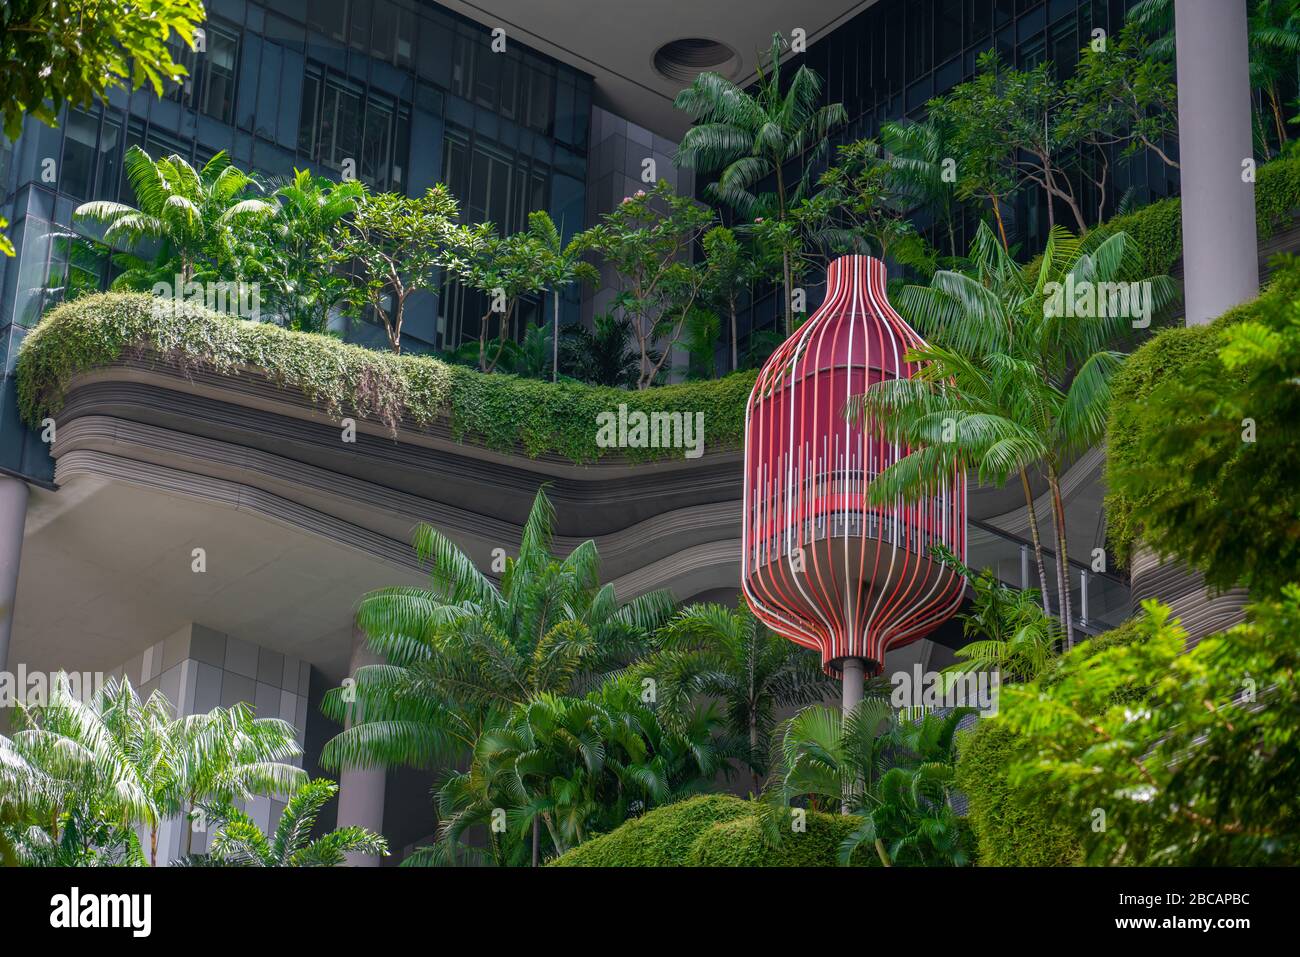 Singapore / Singapore - March 2020: Details of the Hotel in a Garden in Singapore Stock Photo